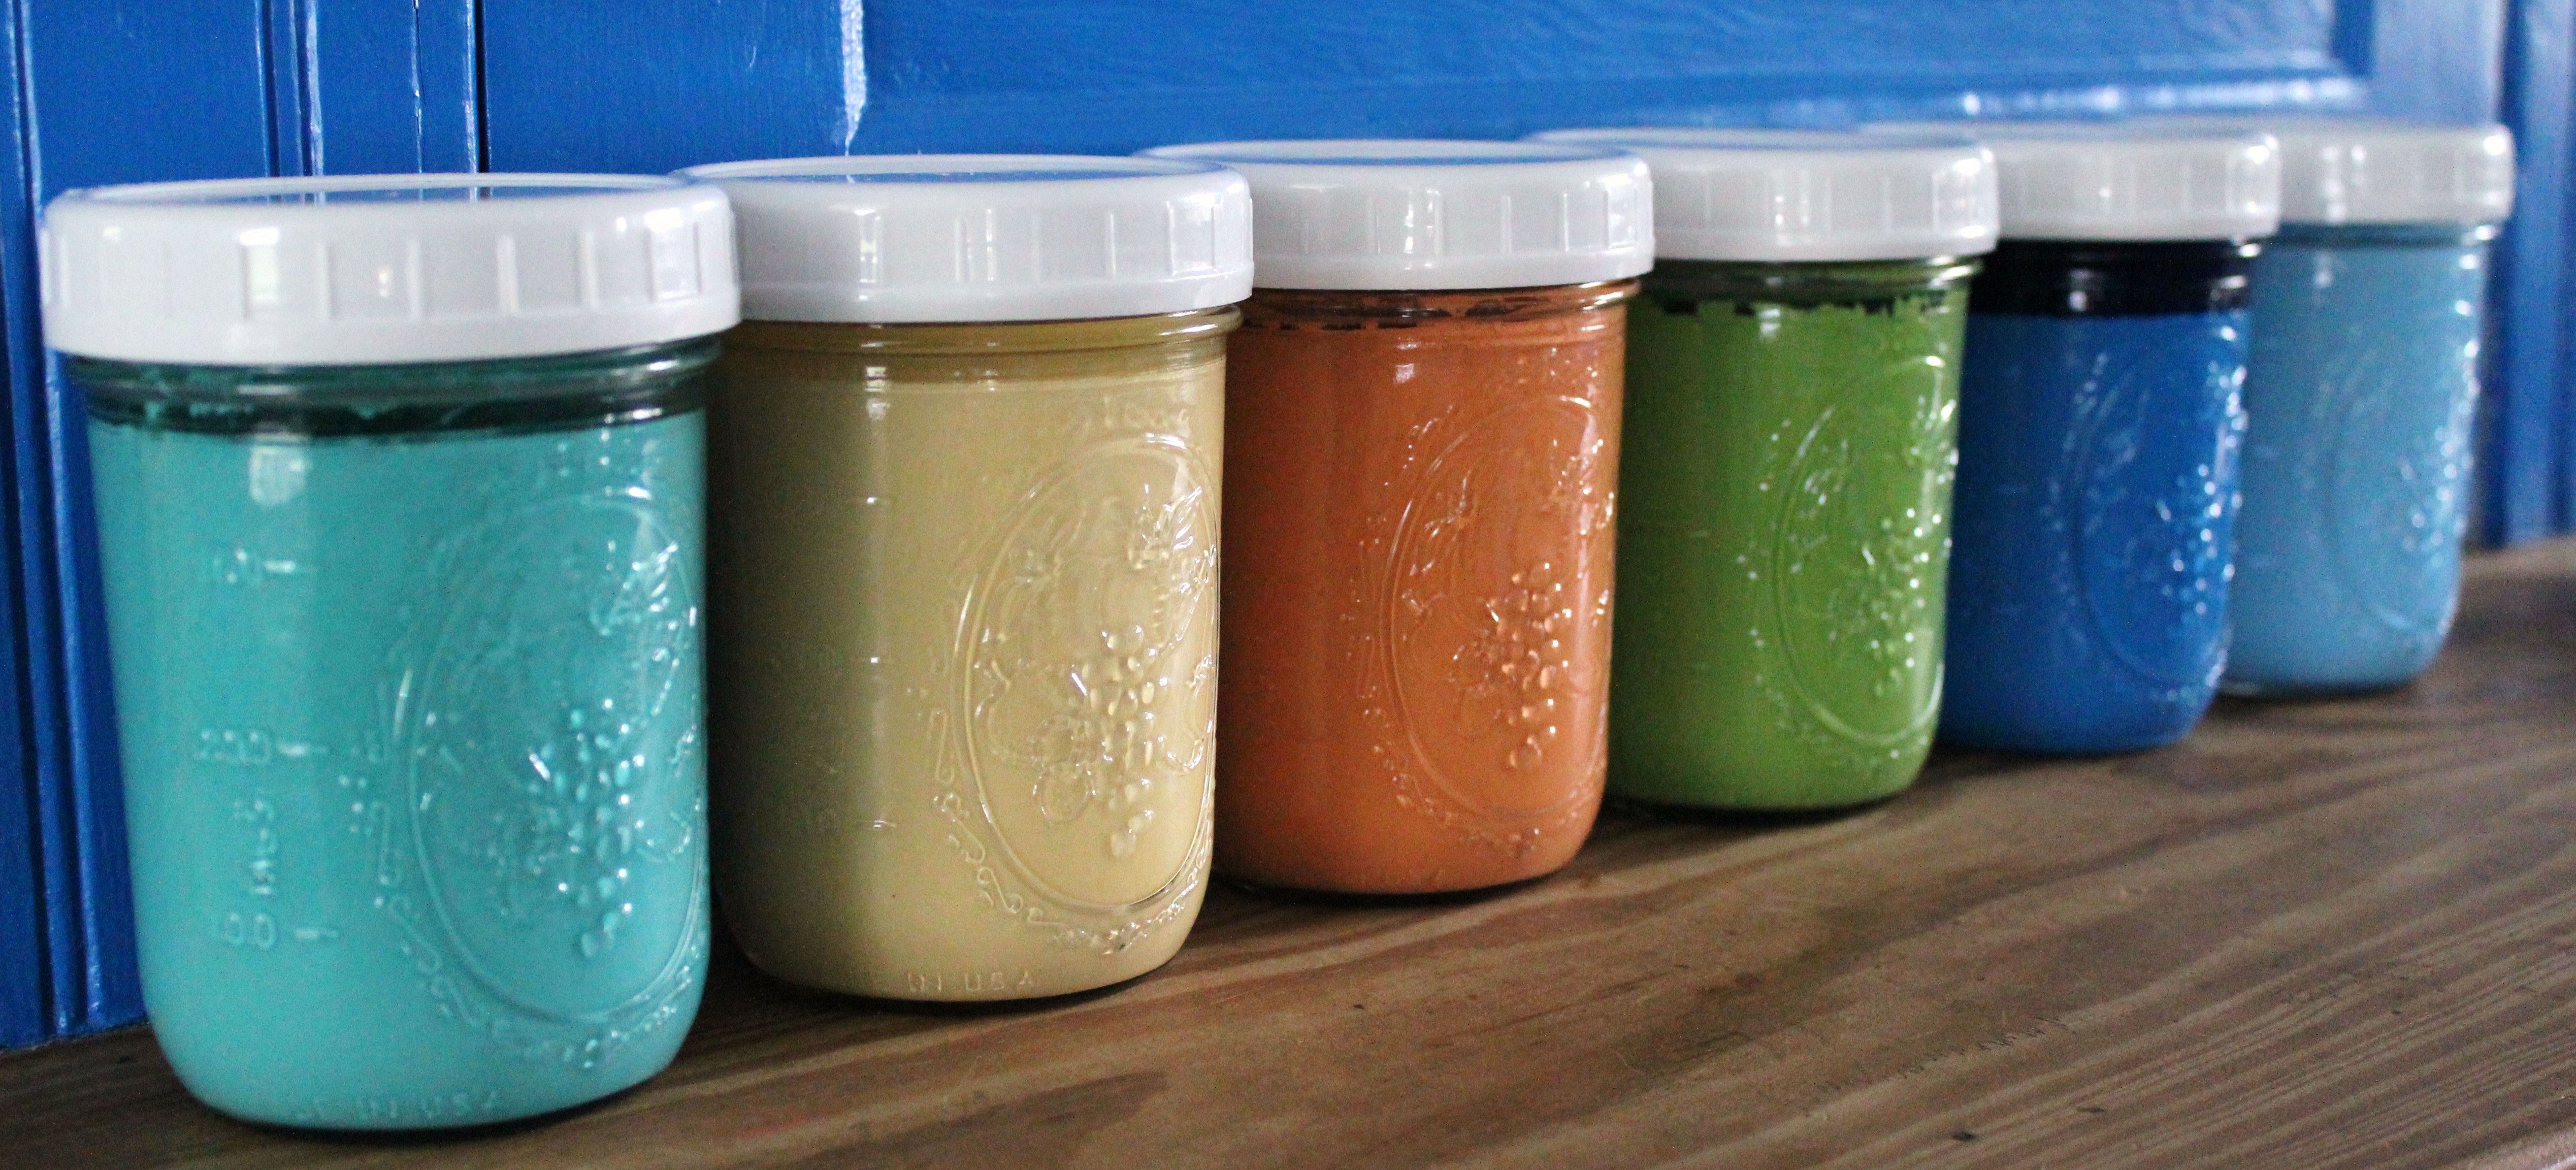 Using canning jars to store touch-up paints.